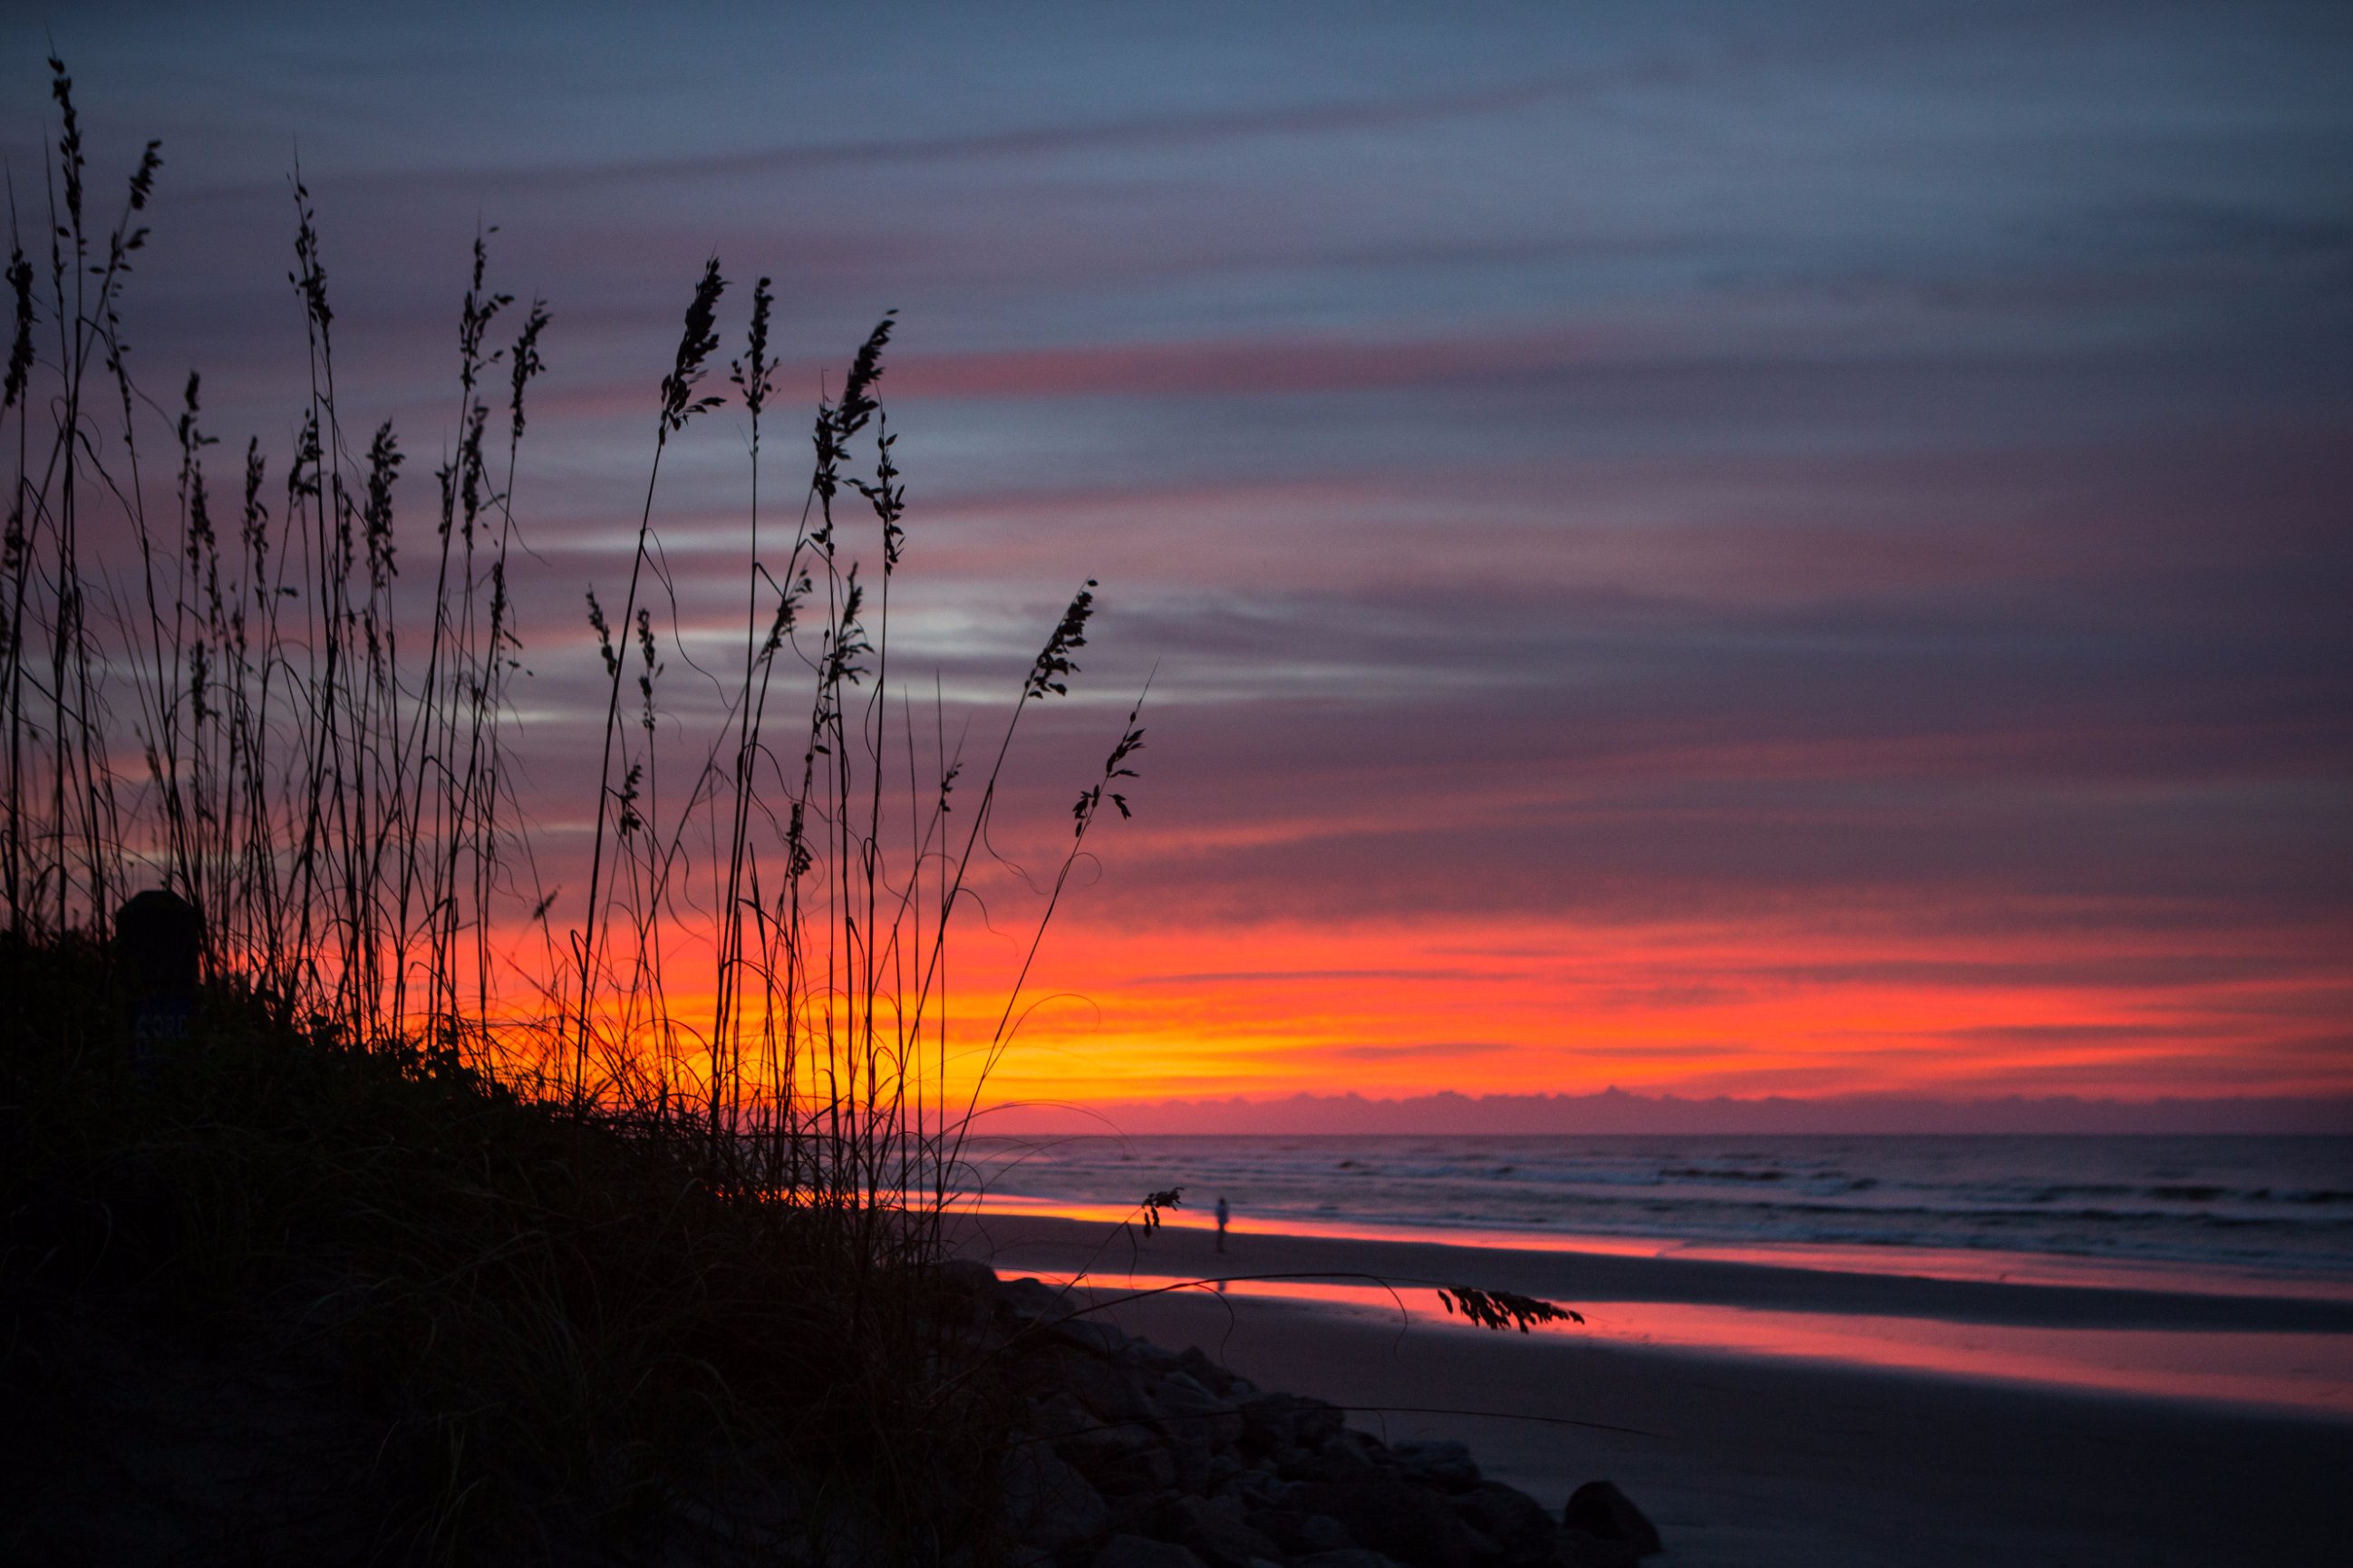 Sunrise beach myrtle incredible sc photography stayed literally condo feet